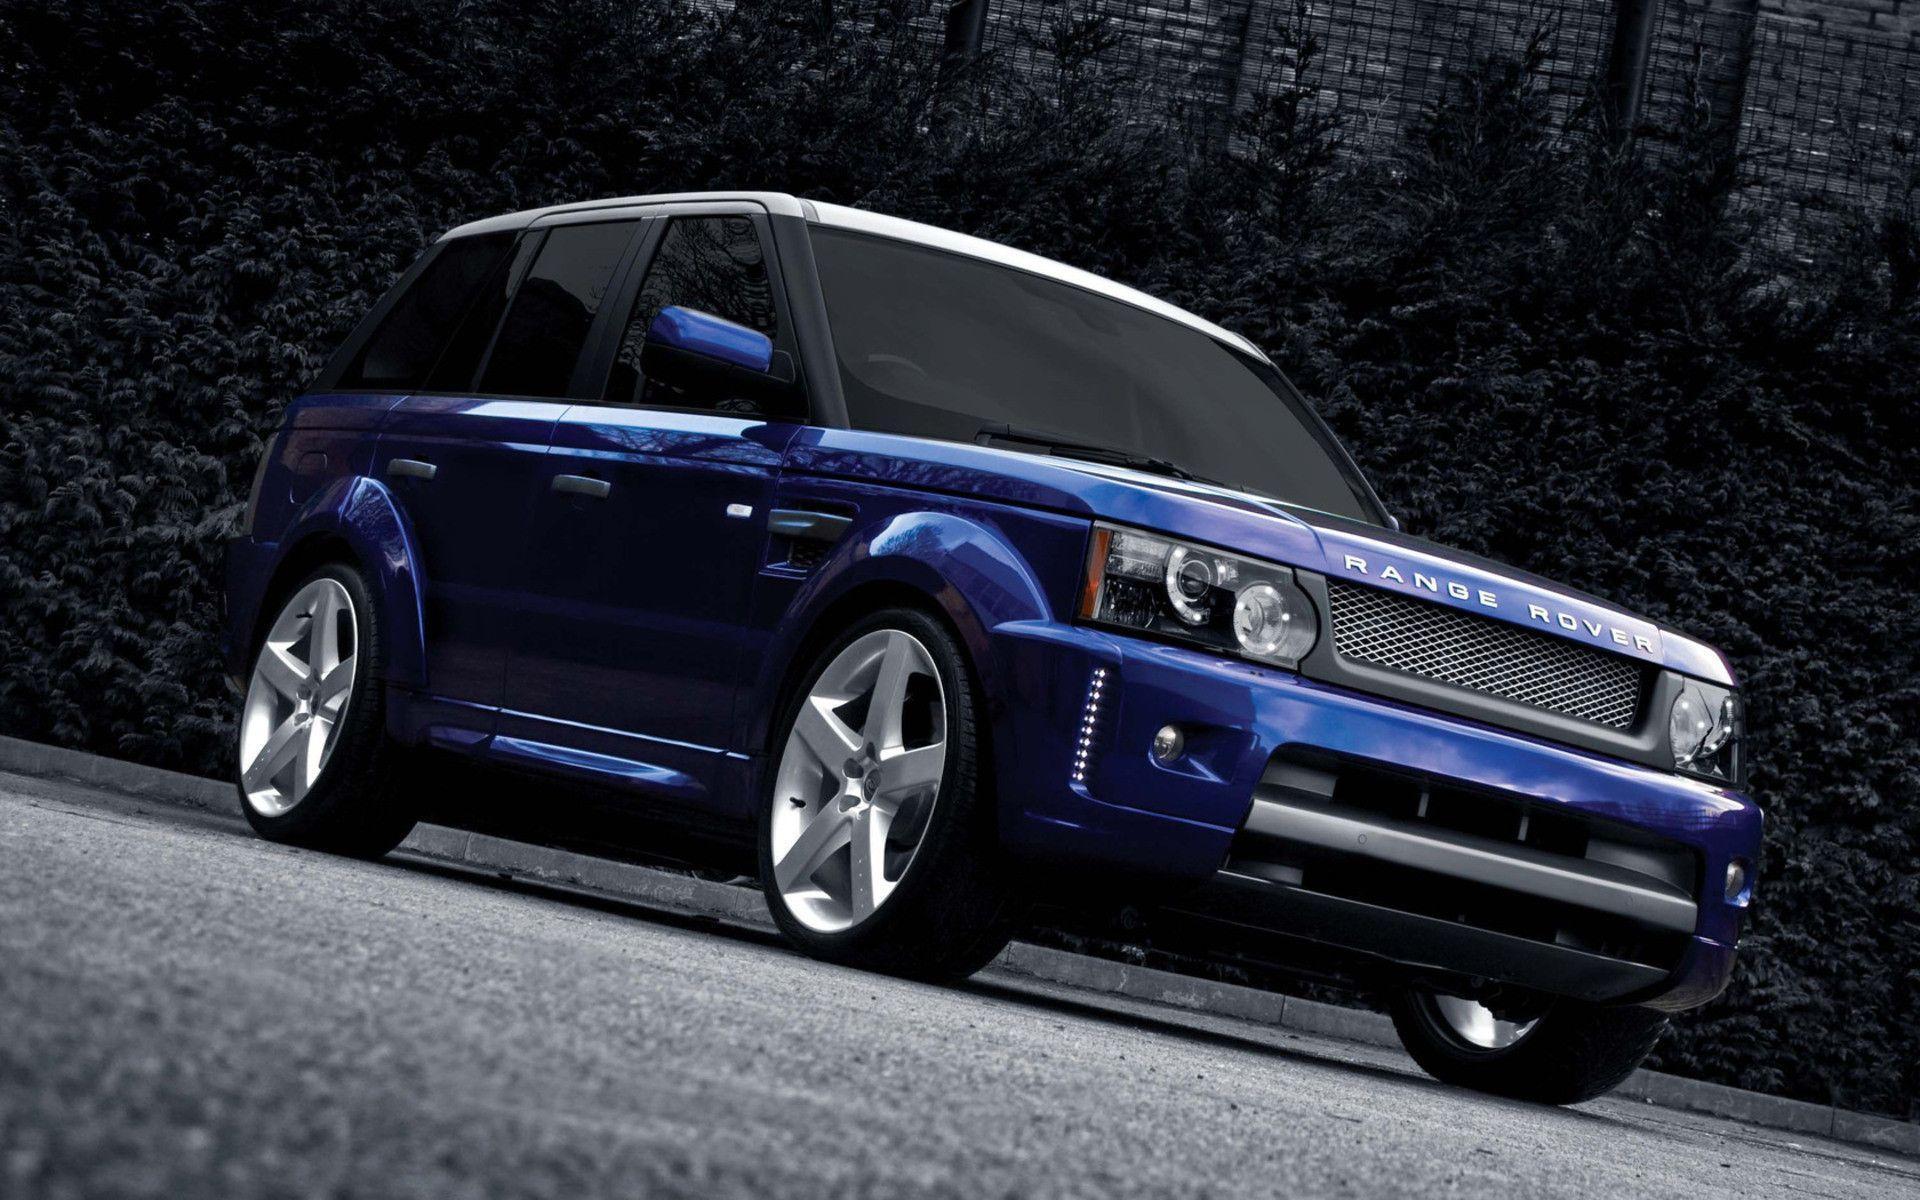 Wallpaper Abyss Everything Range Rover Vehicles Range Rover. HD